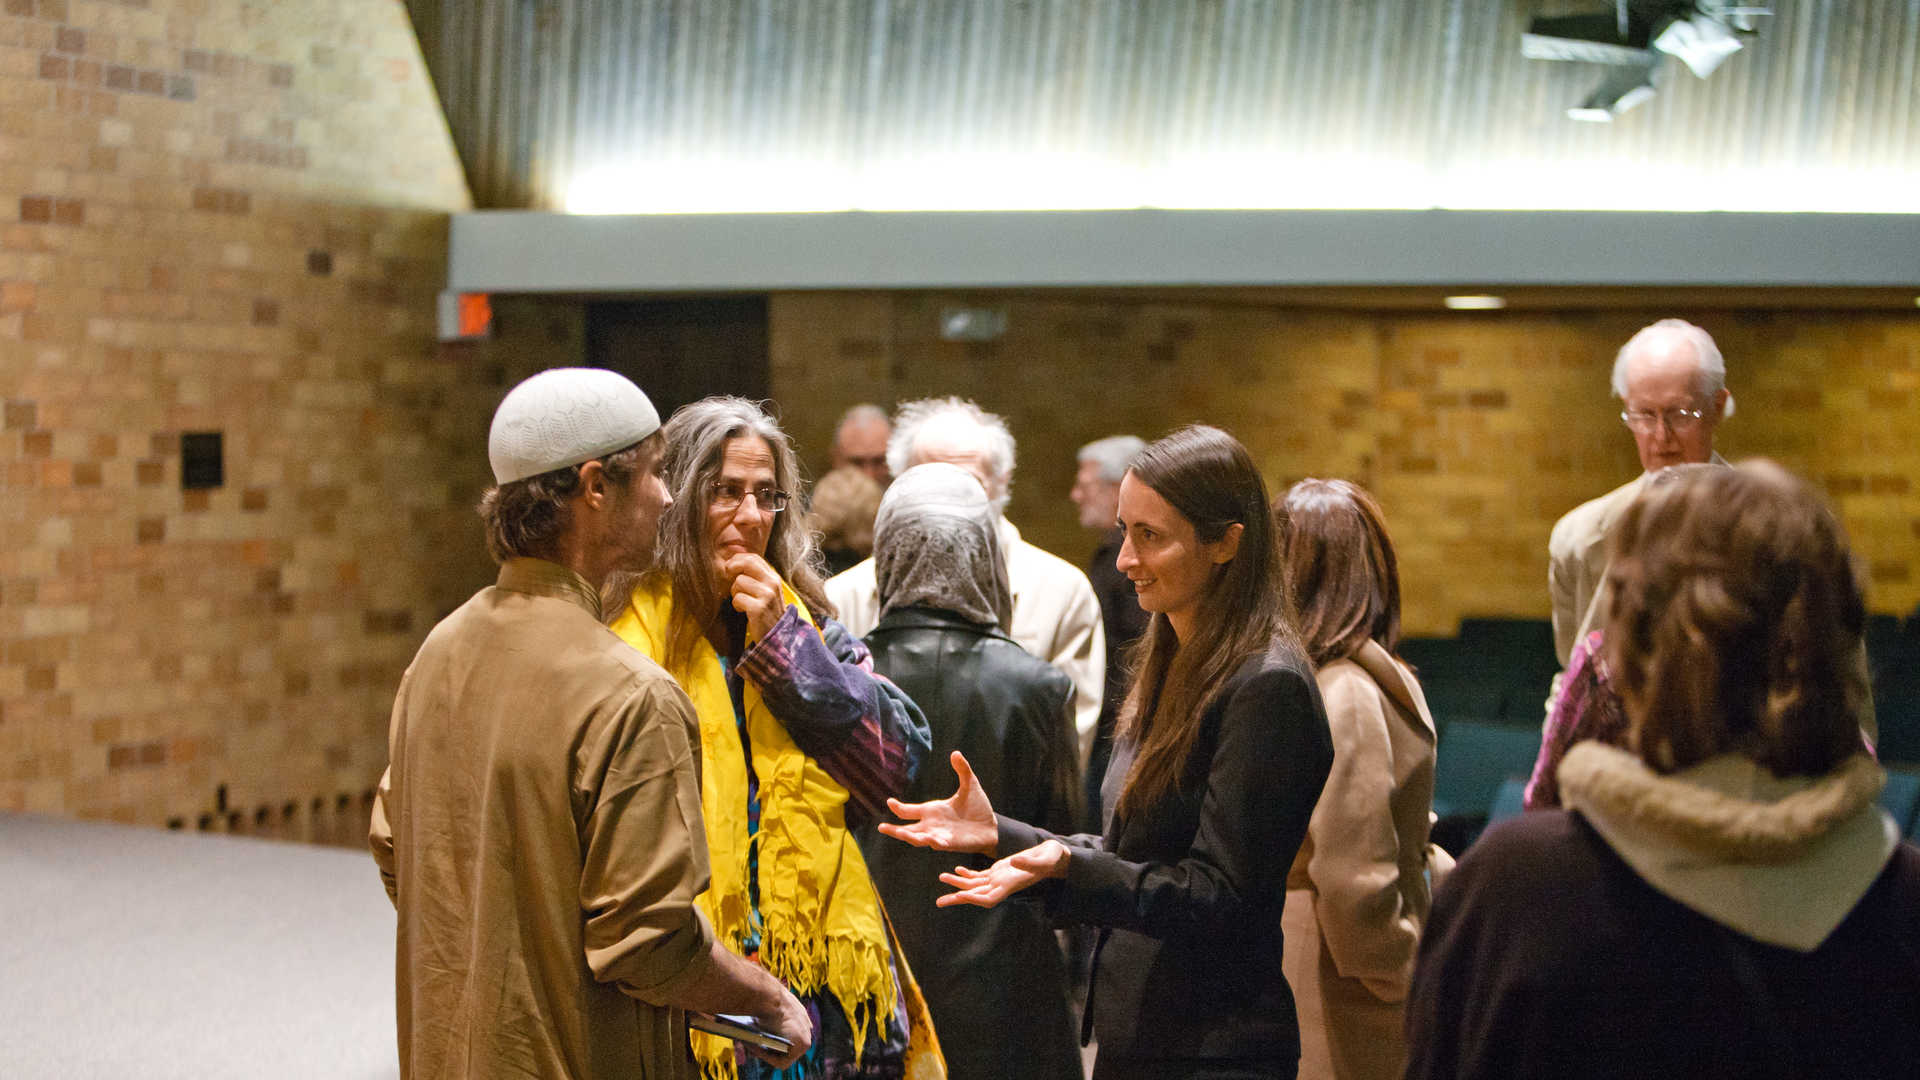 Guests speak with Rabbi Weintraub at a Jay Phillips Center event.